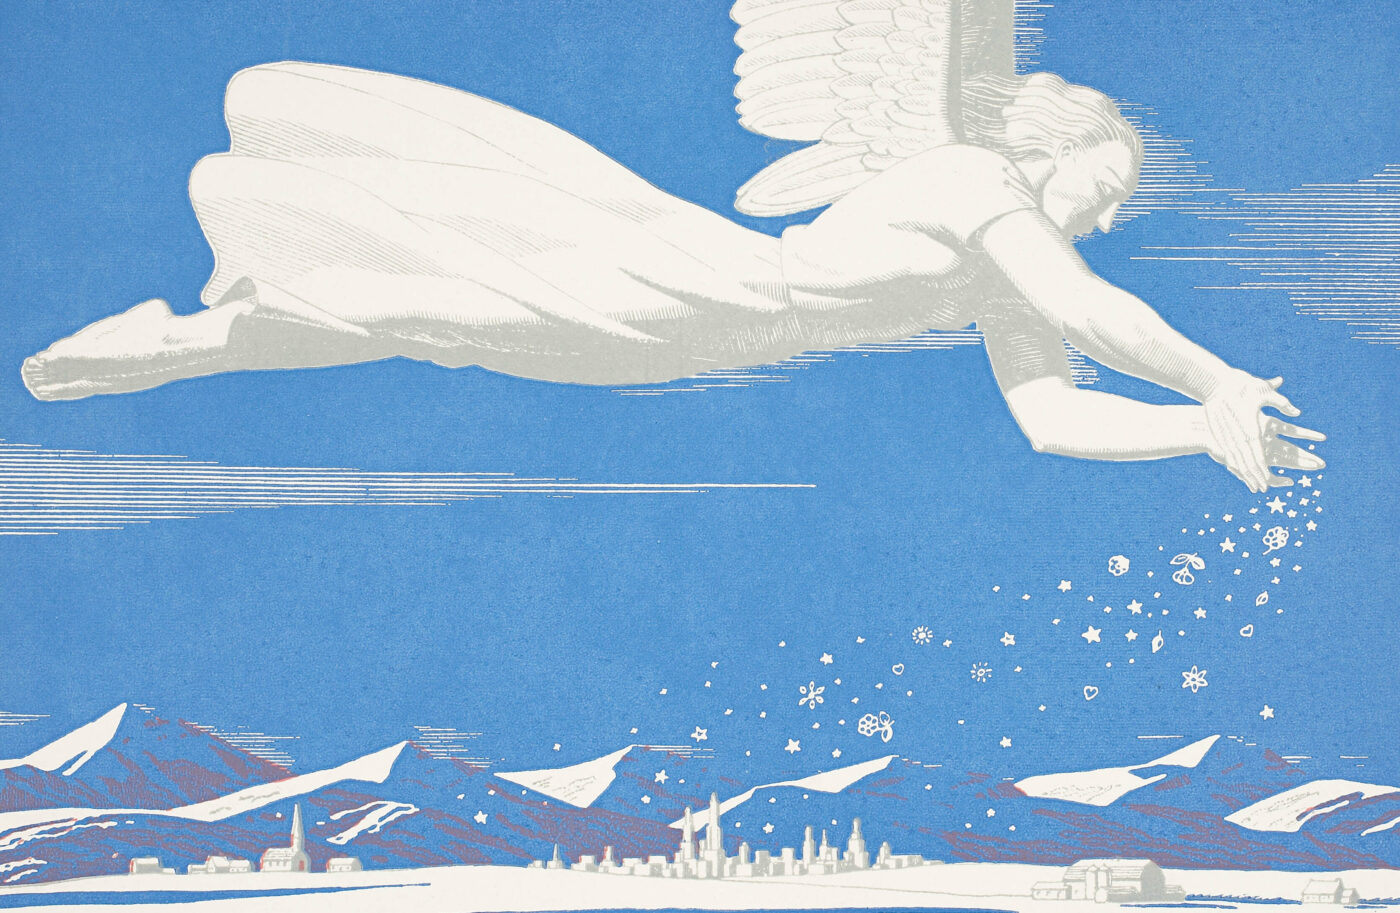 An angel flies over a bright background, dropping snowflakes on a quiet town below.